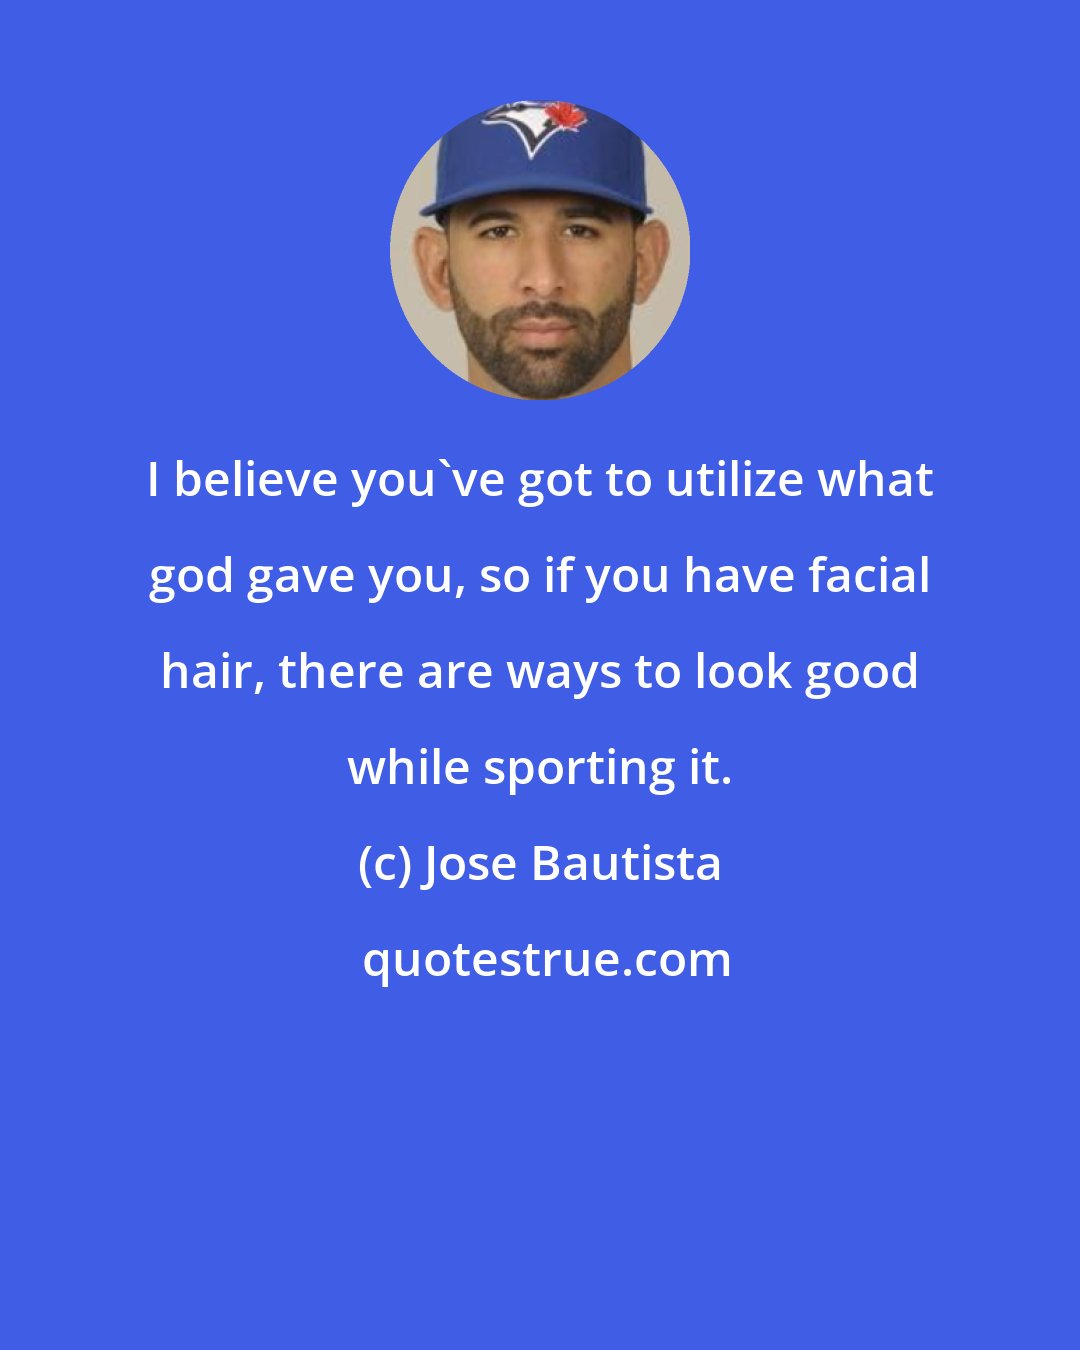 Jose Bautista: I believe you've got to utilize what god gave you, so if you have facial hair, there are ways to look good while sporting it.